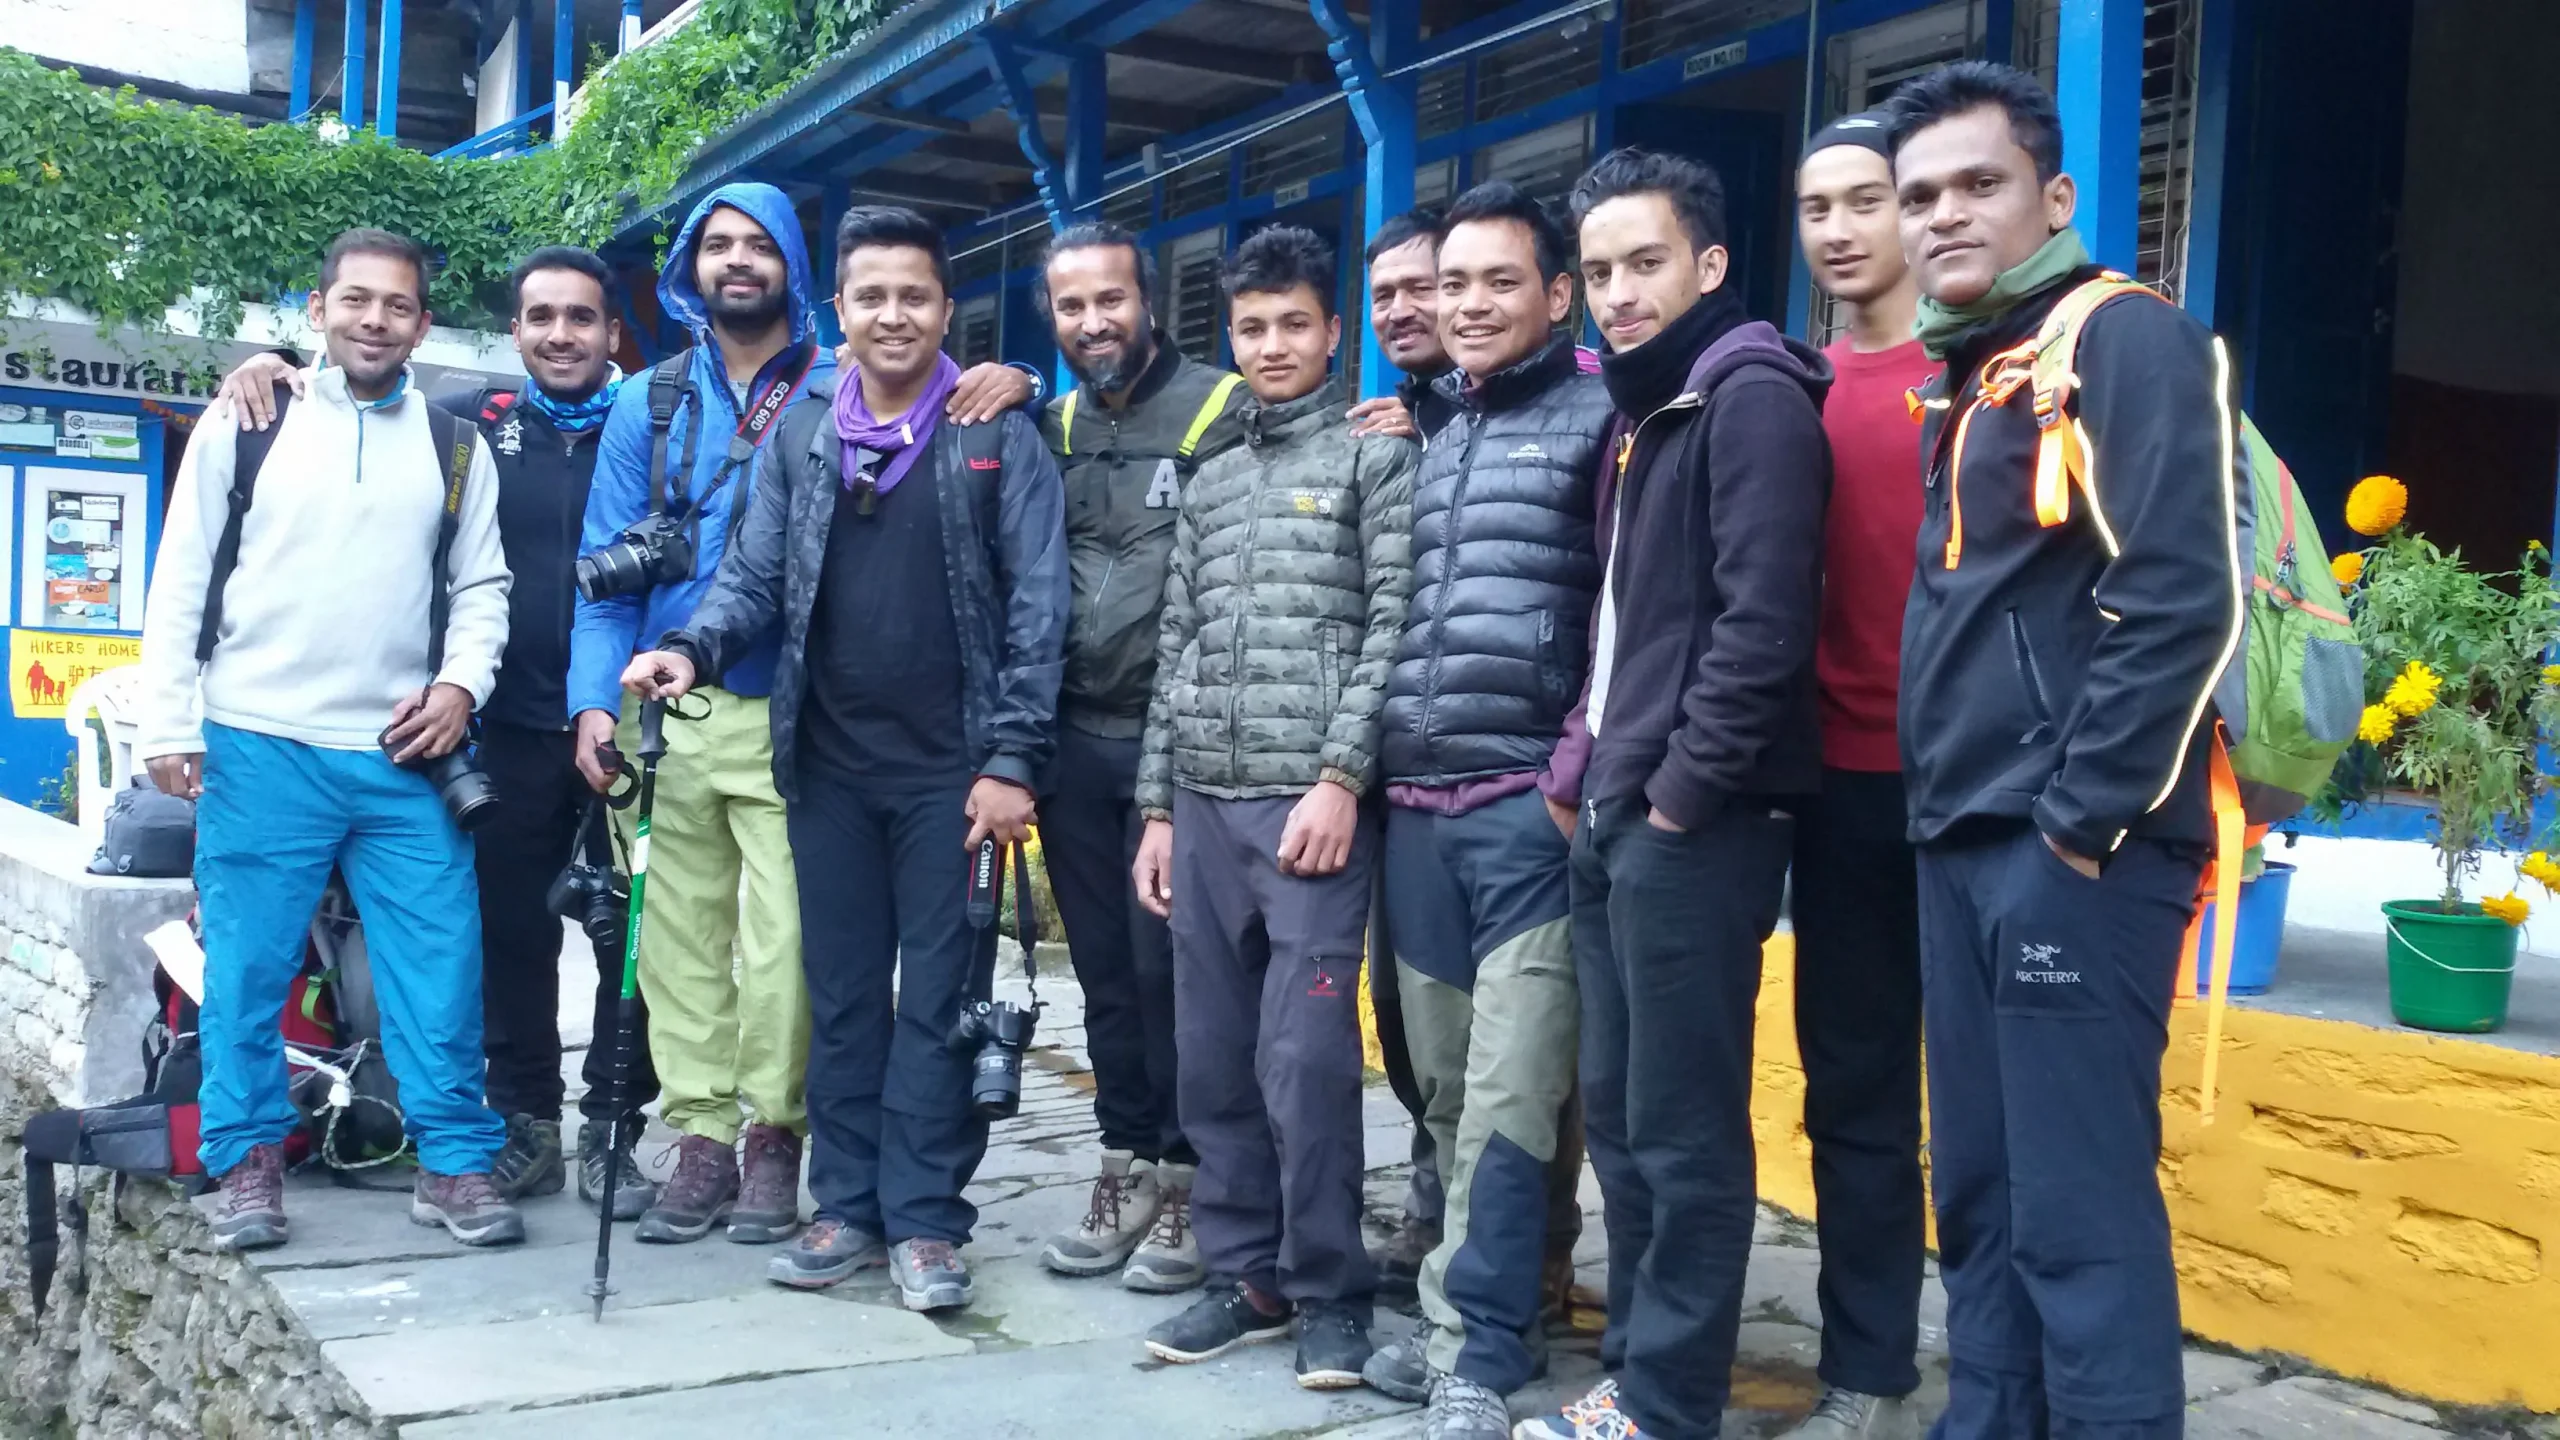 Photography tour in Nepal | Photography treks in Nepal.